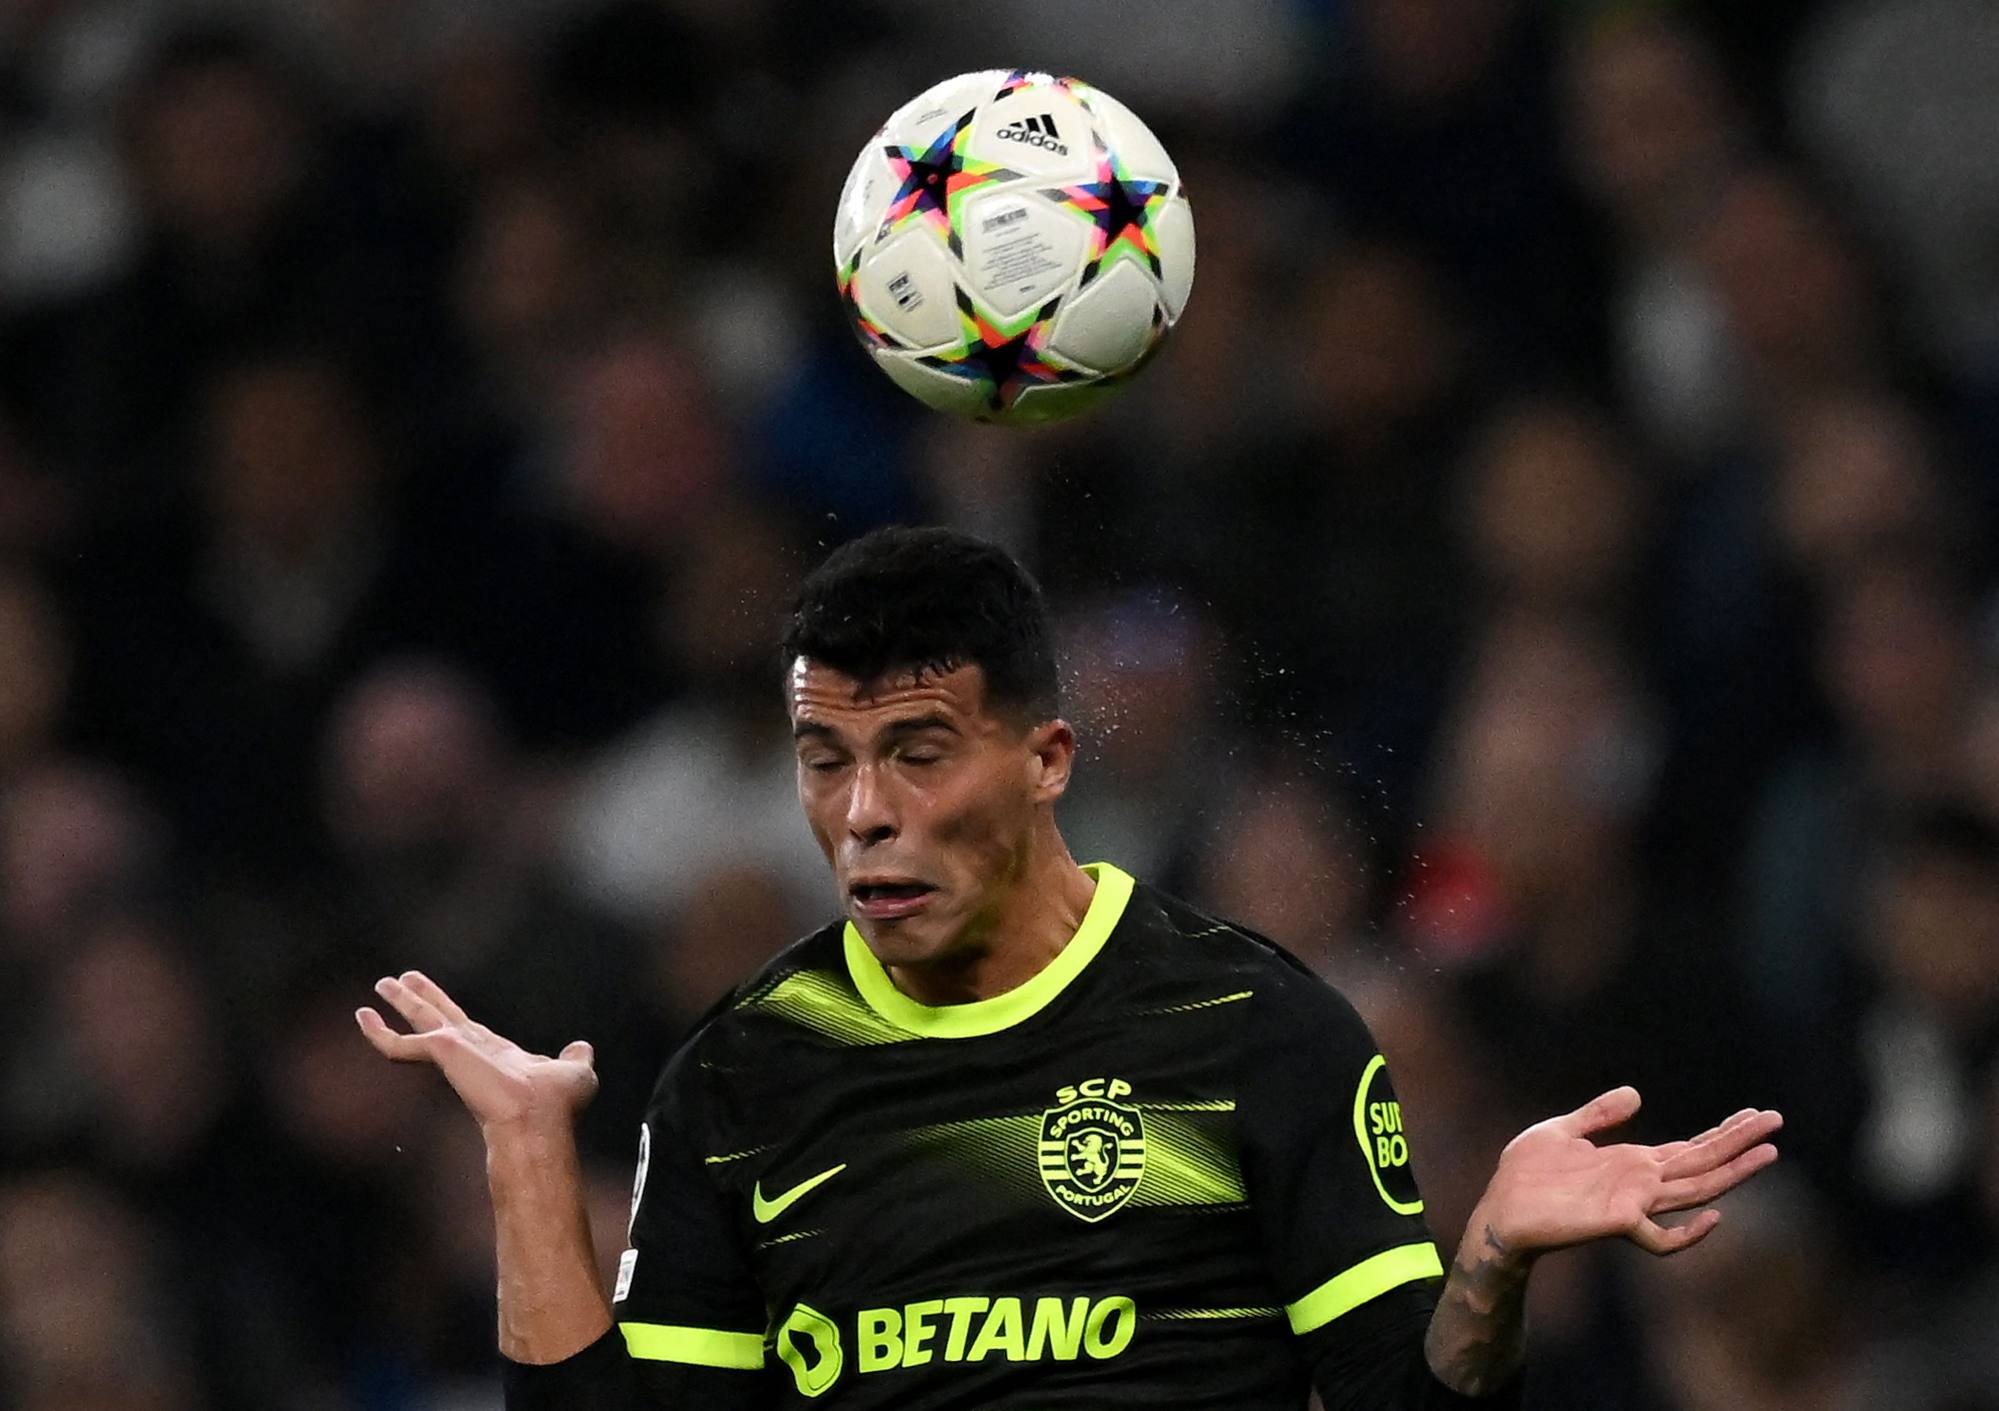 Sporting Lisbon’s Spanish defender Pedro Porro heads the ball during a Uefa Champions League match against Tottenham. Photo: AFP